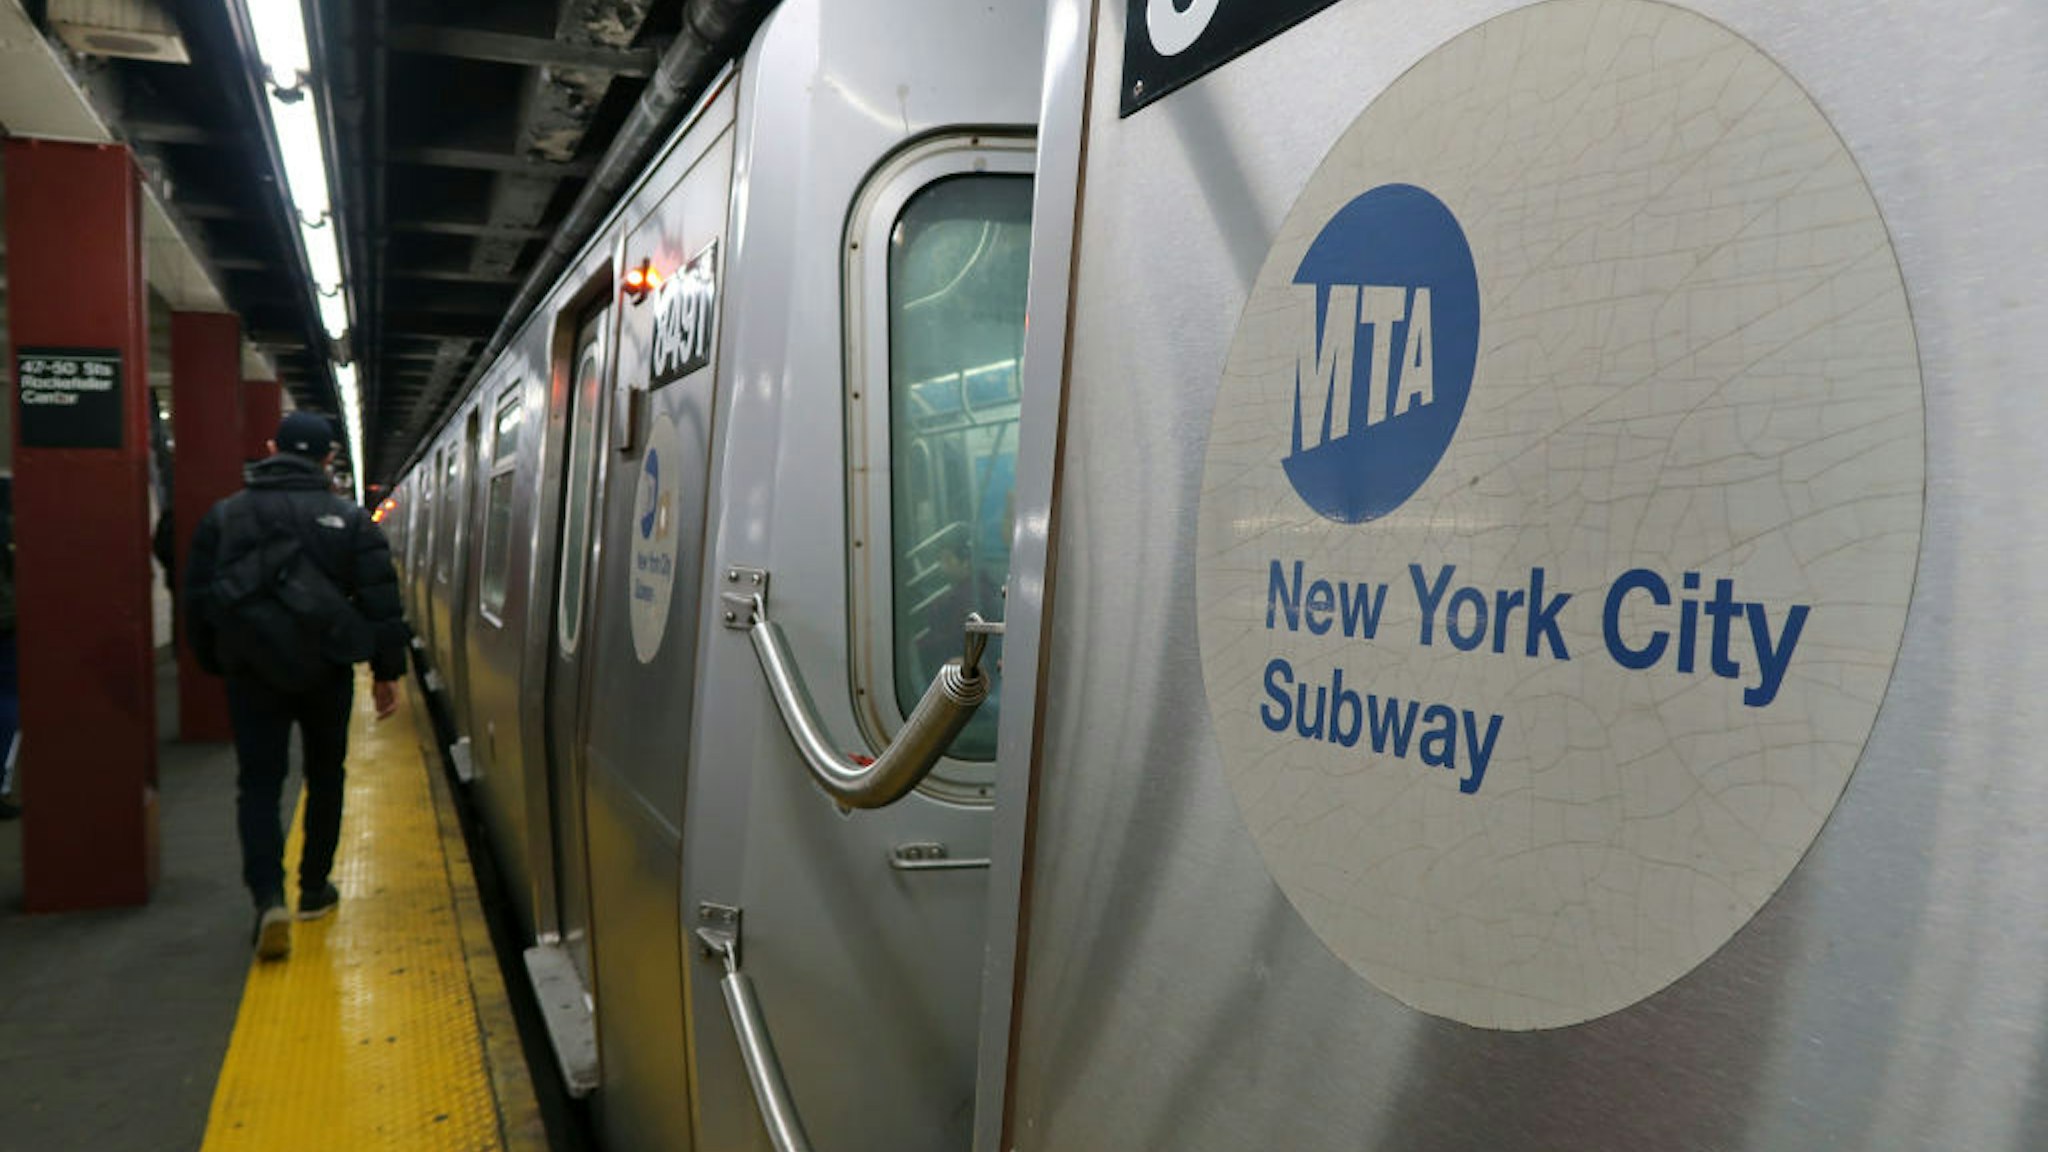 A subway train pulls into a station under Rockefeller Center on March 6, 2018 in New York City.